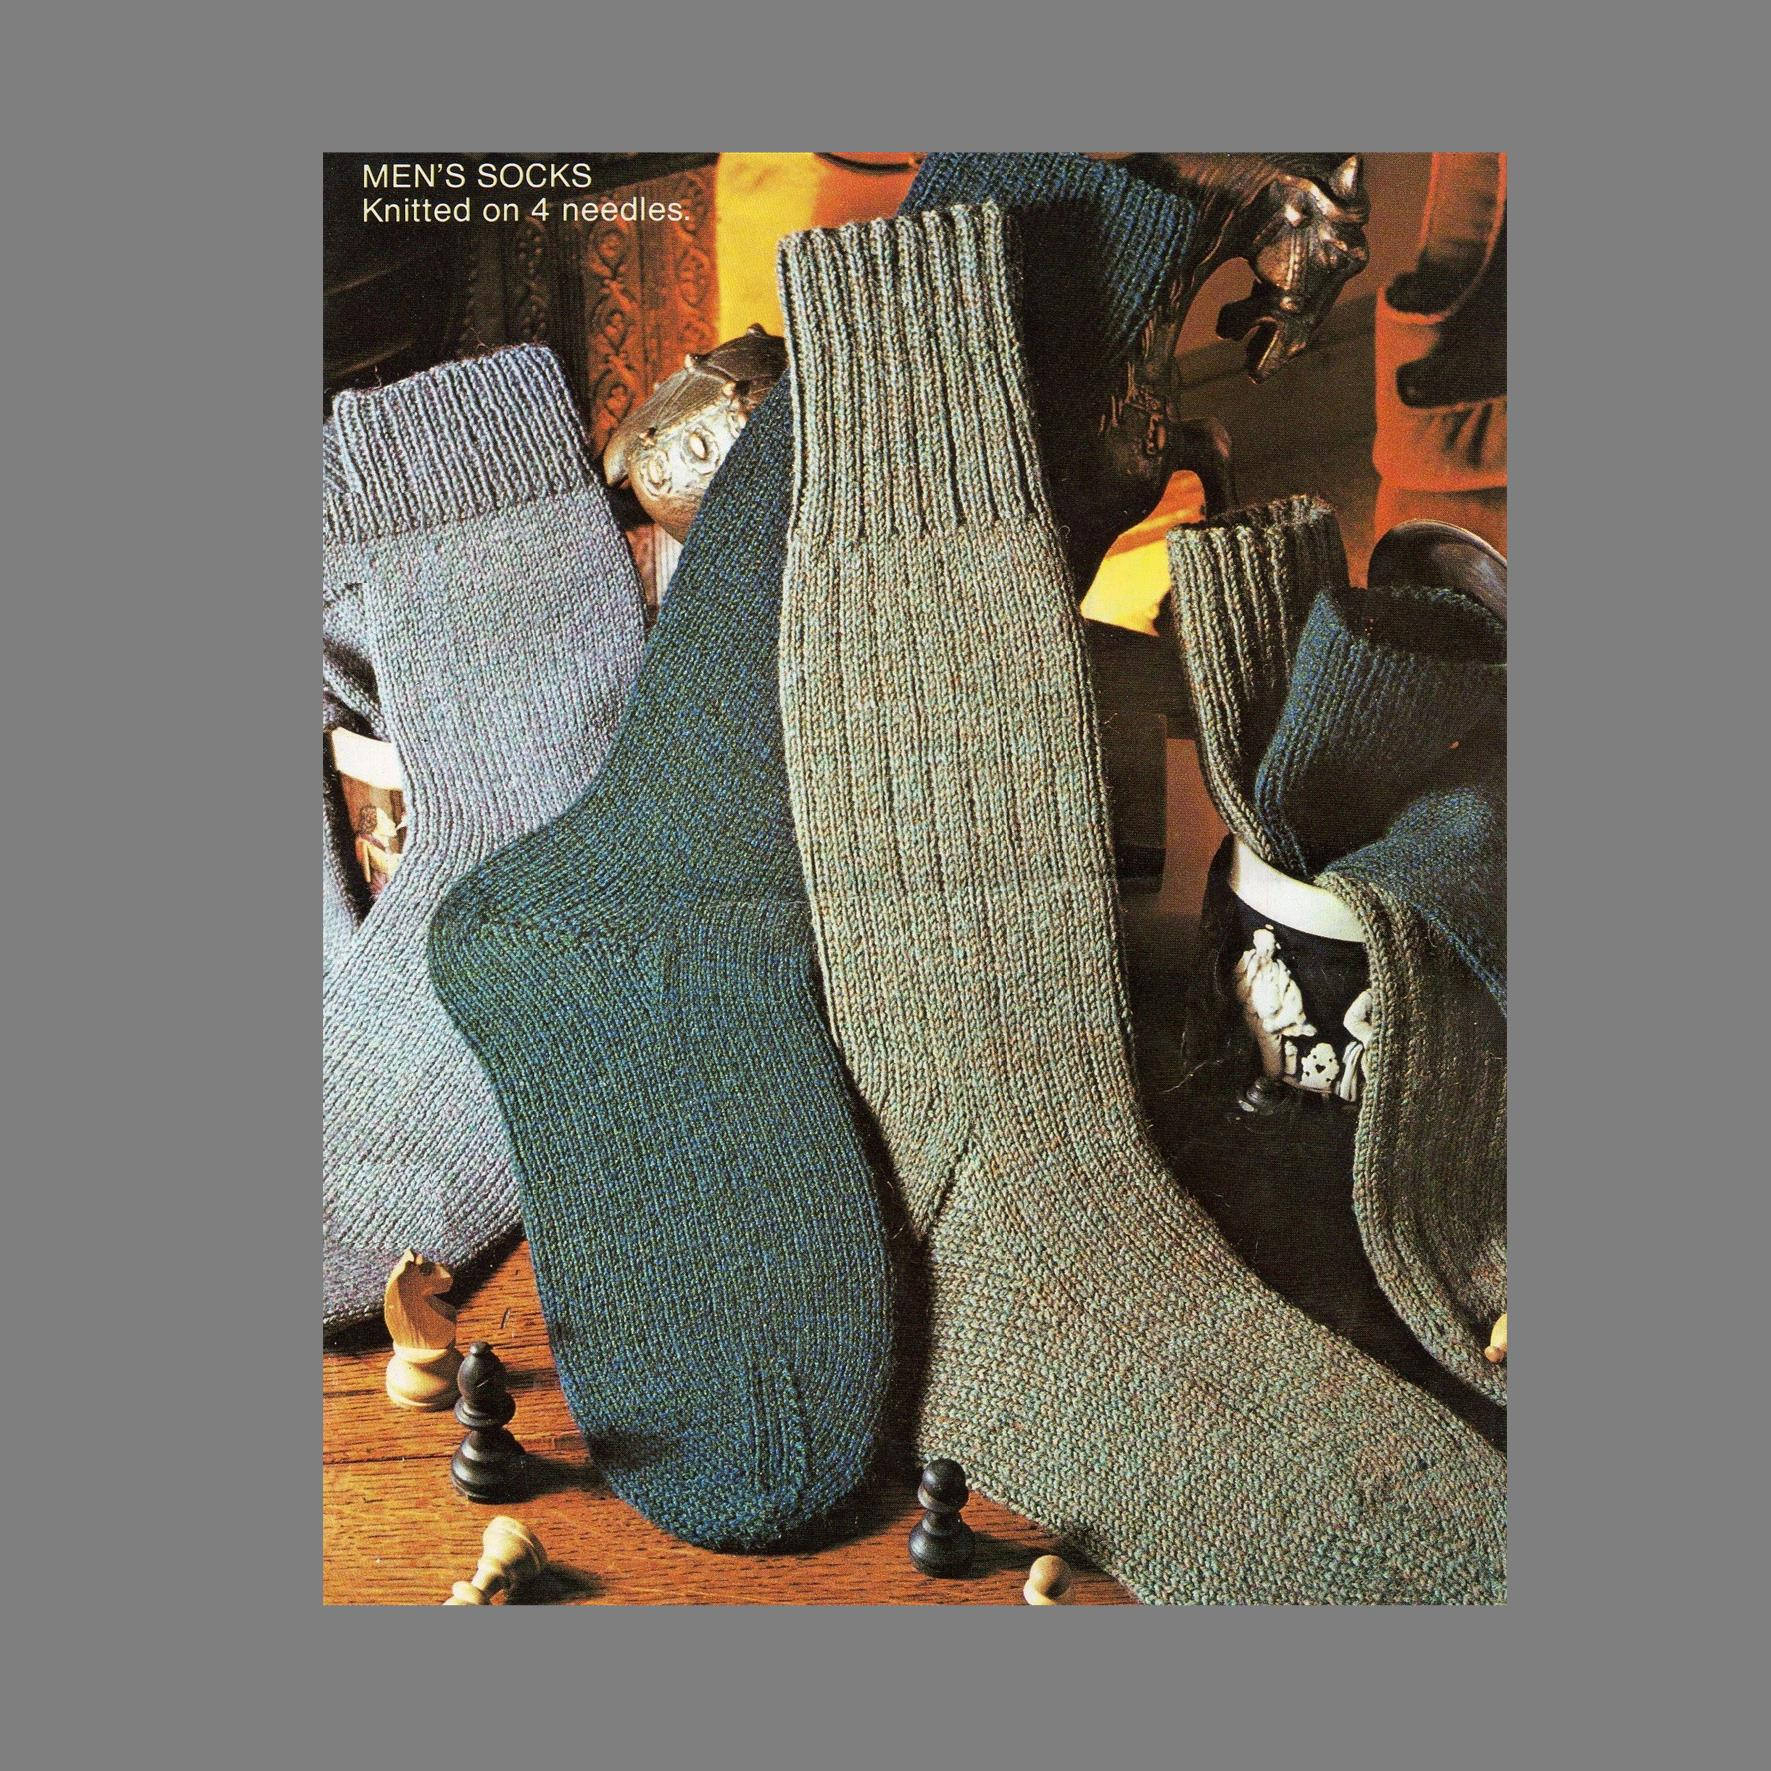 Free Knitting Patterns For Socks On Four Needles Pdf Sock Pattern 4 Ply Socks In Three Styles Using Four Needles Mens Socks Knitting Pattern Pdf Instant Download Post Free Patterns